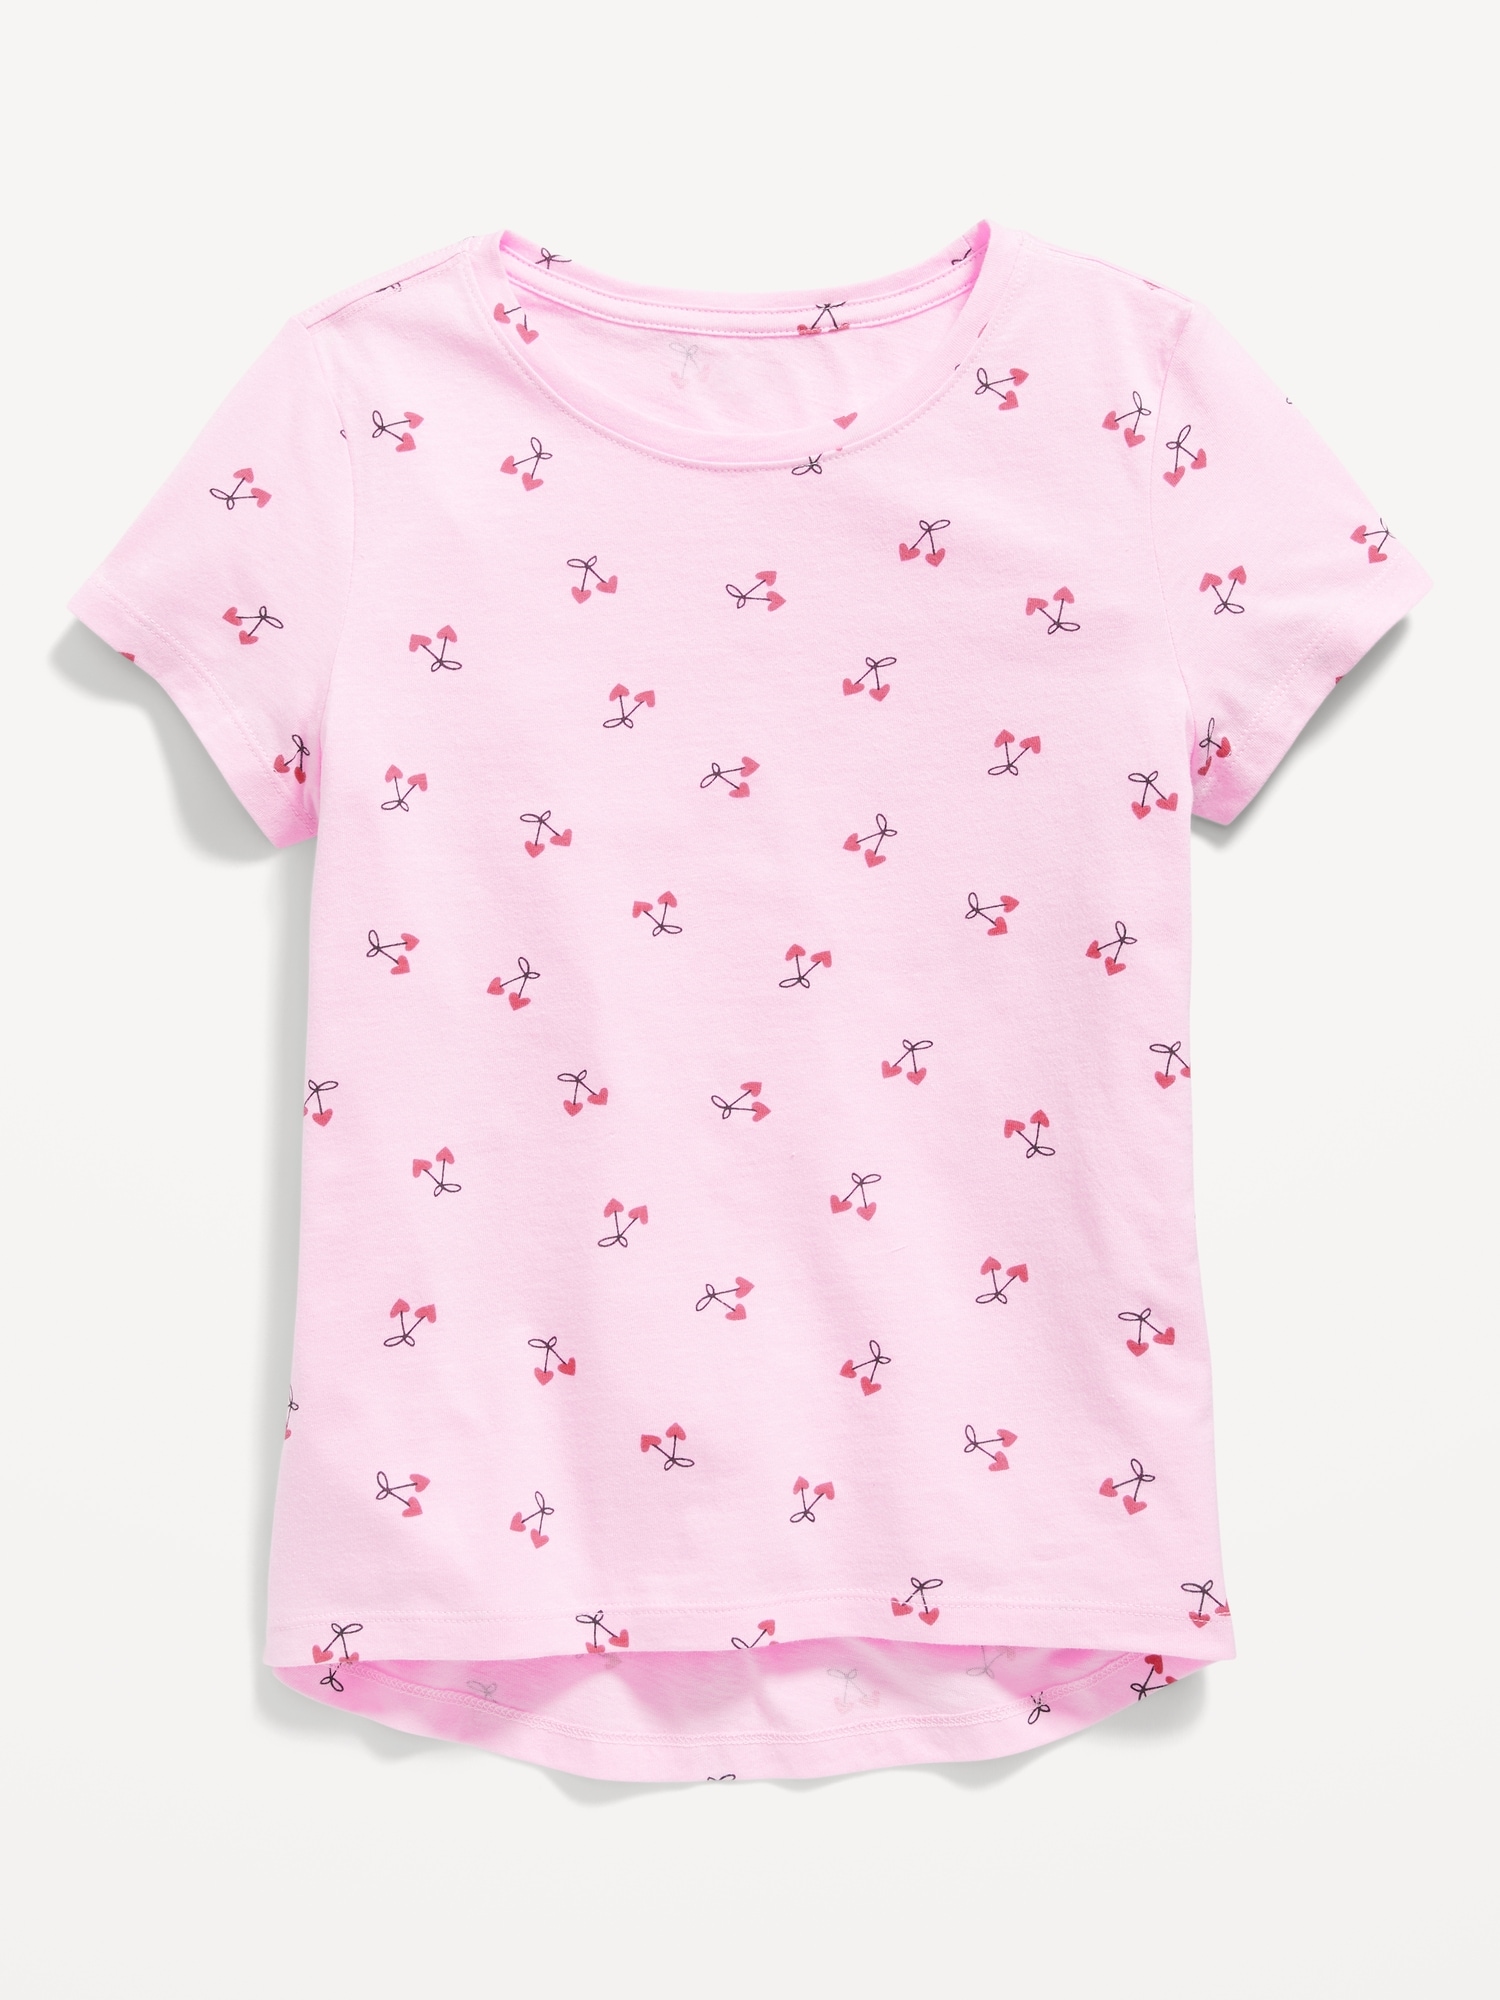 Printed Softest T-Shirt for Girls